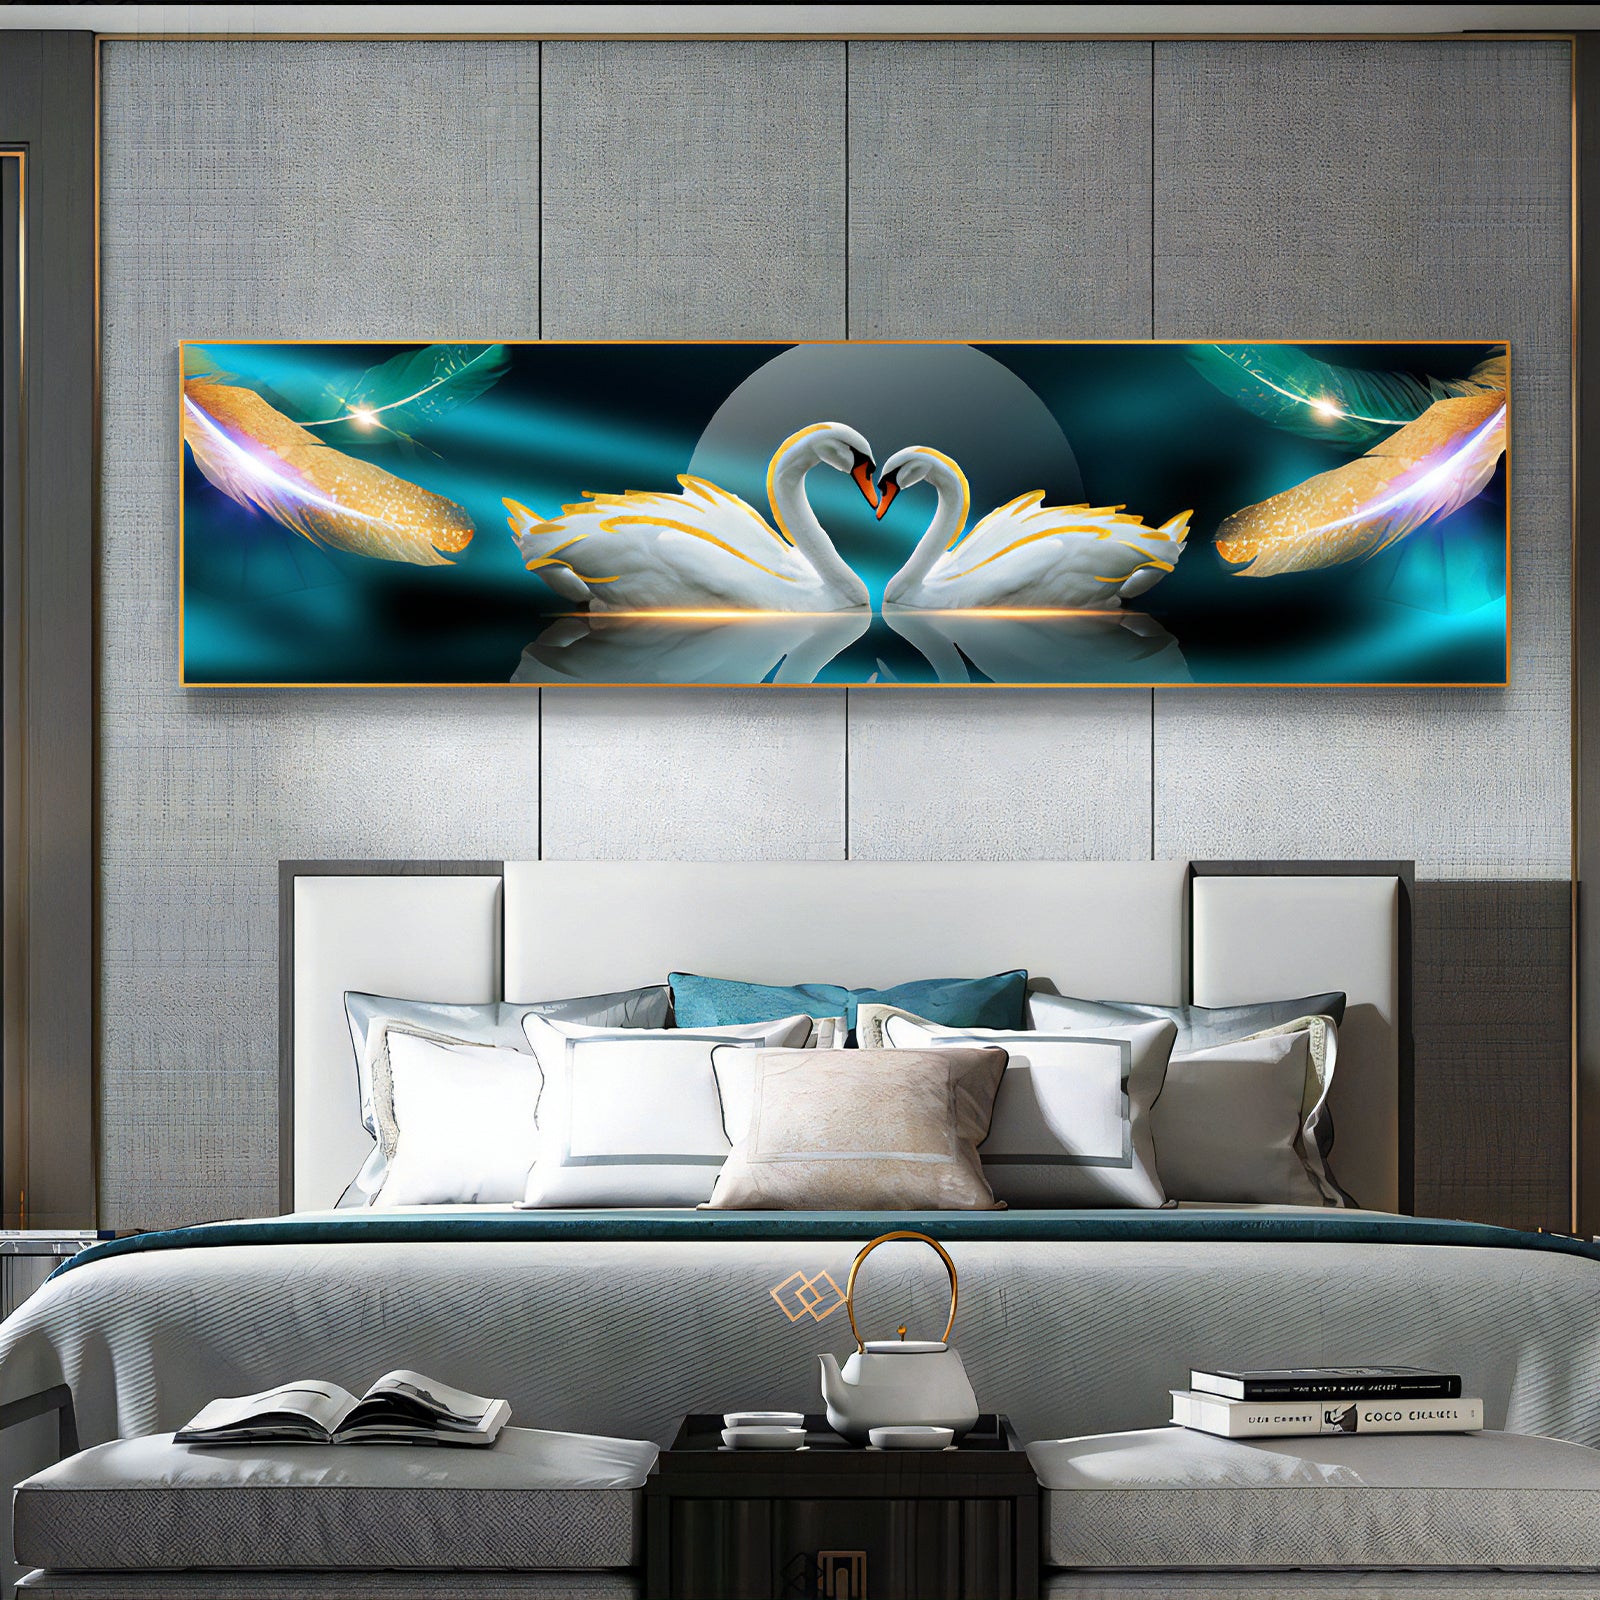 VOFFOV® Couple White Swan Wall Art for Bedroom